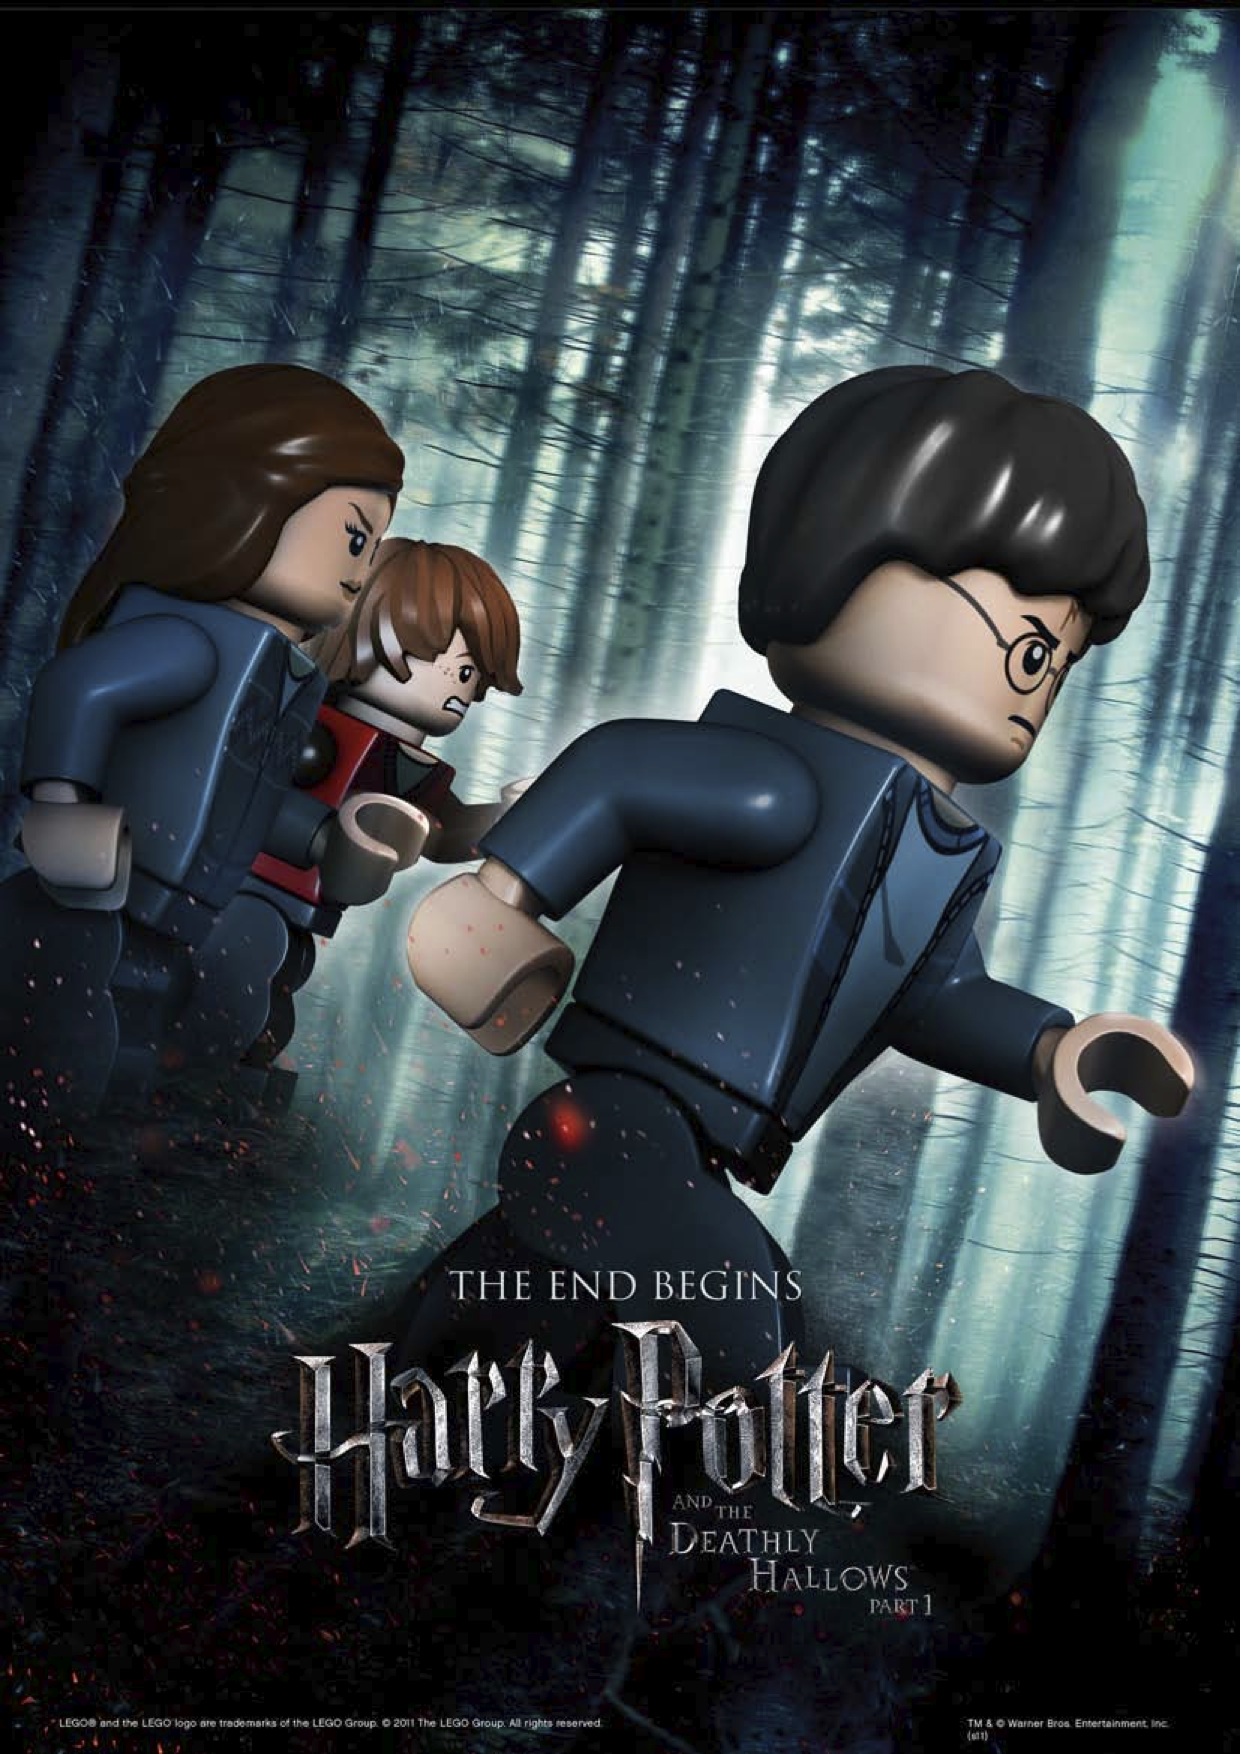 Harry Potter And The Deathly Hallows: Part 1 #4